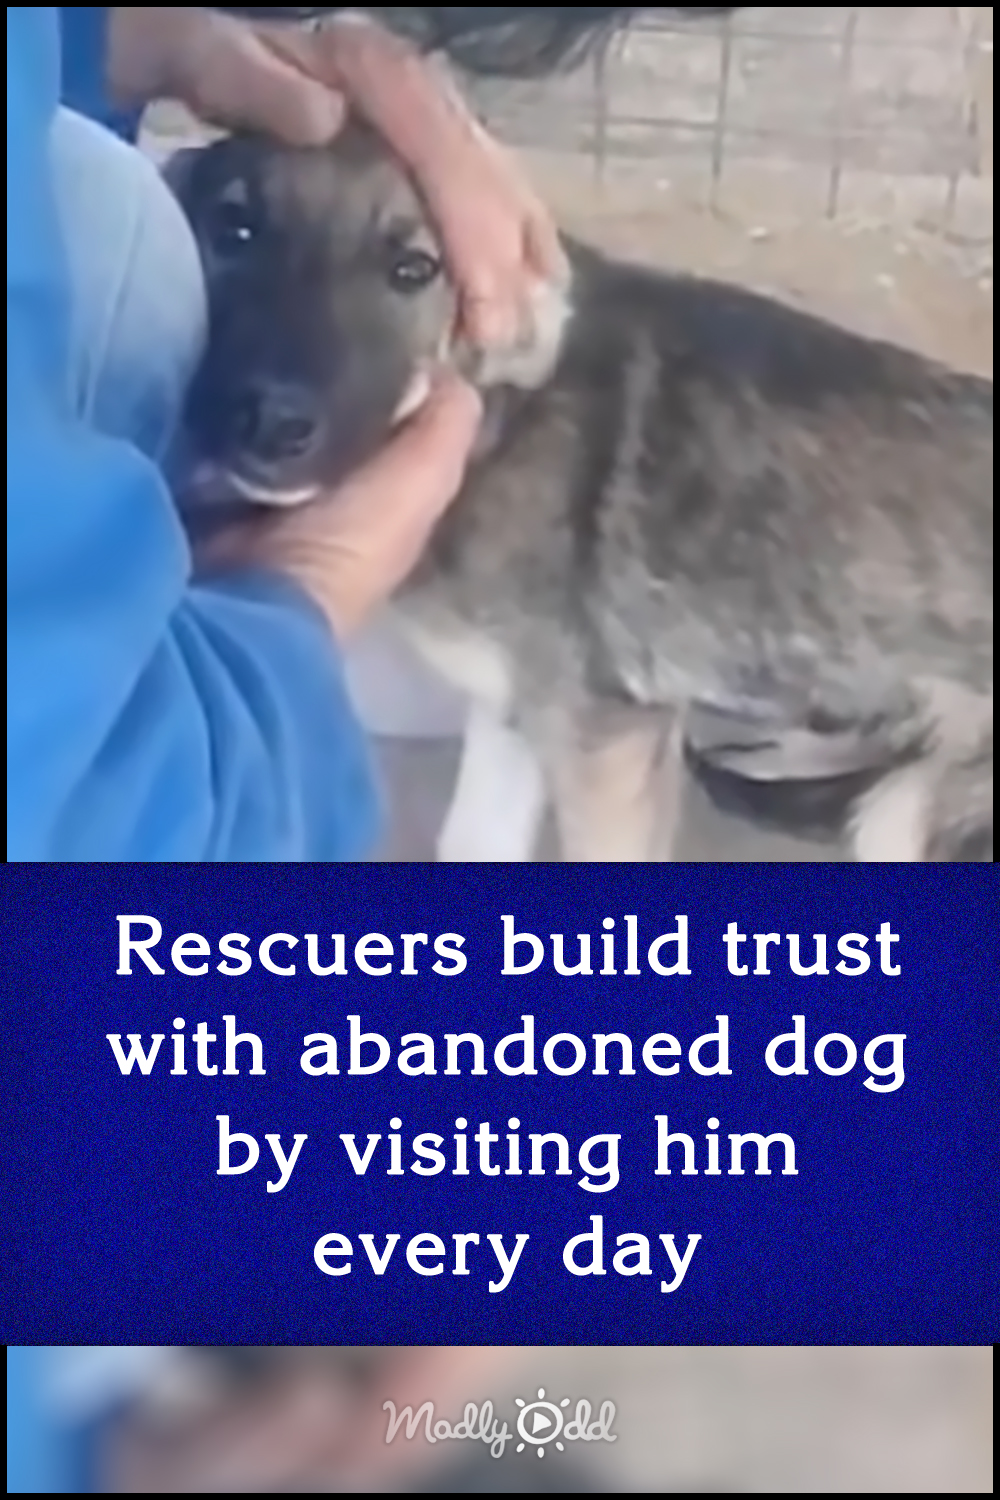 Rescuers build trust with abandoned dog by visiting him every day